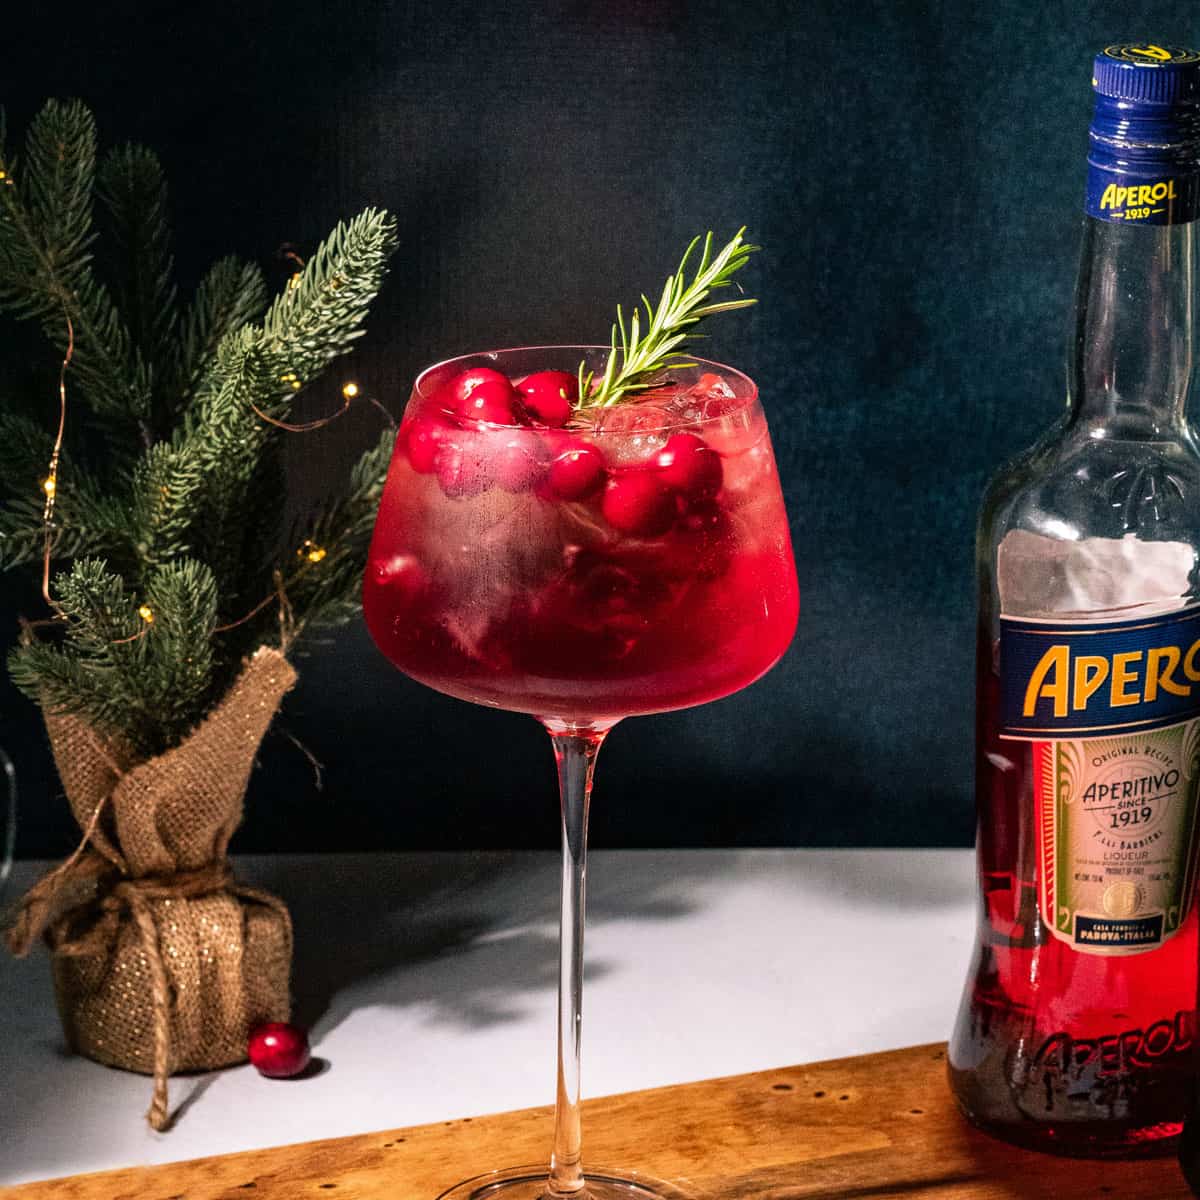 Spritz on a wood board with a mini Christmas tree and bottle of Aperol in the background.